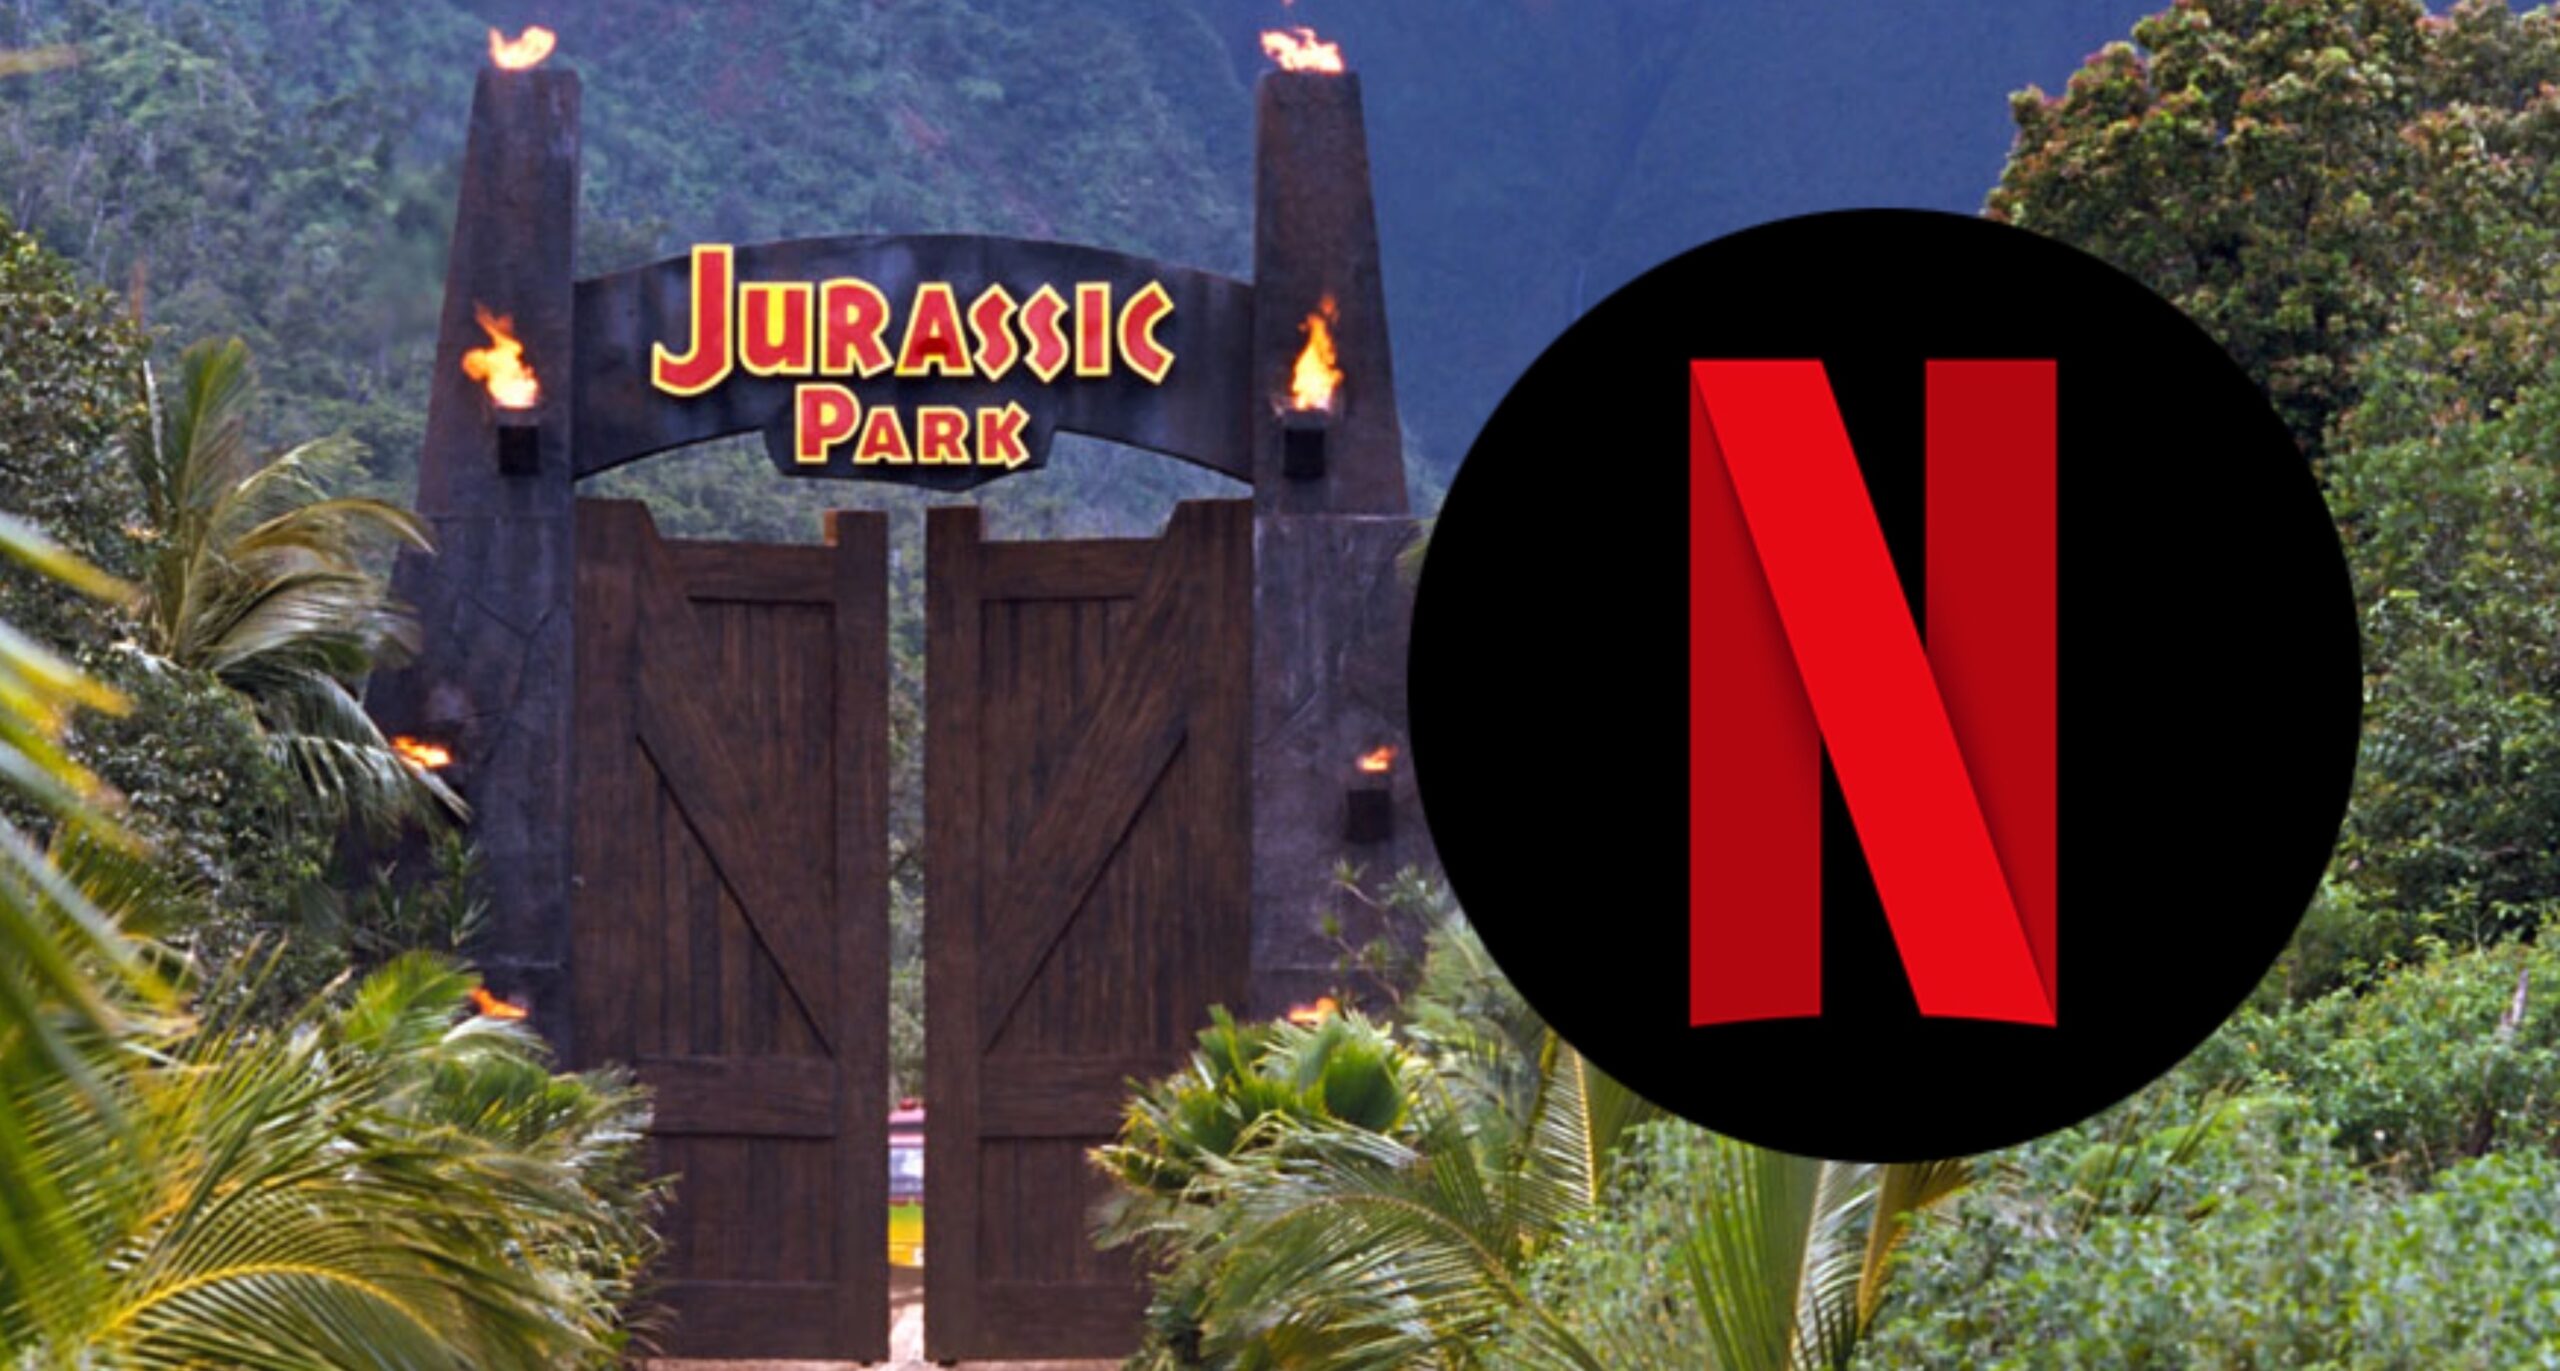 ‘Jurassic Park’ Trilogy Will Be Leaving Netflix in September After Only 2 Months of Streaming